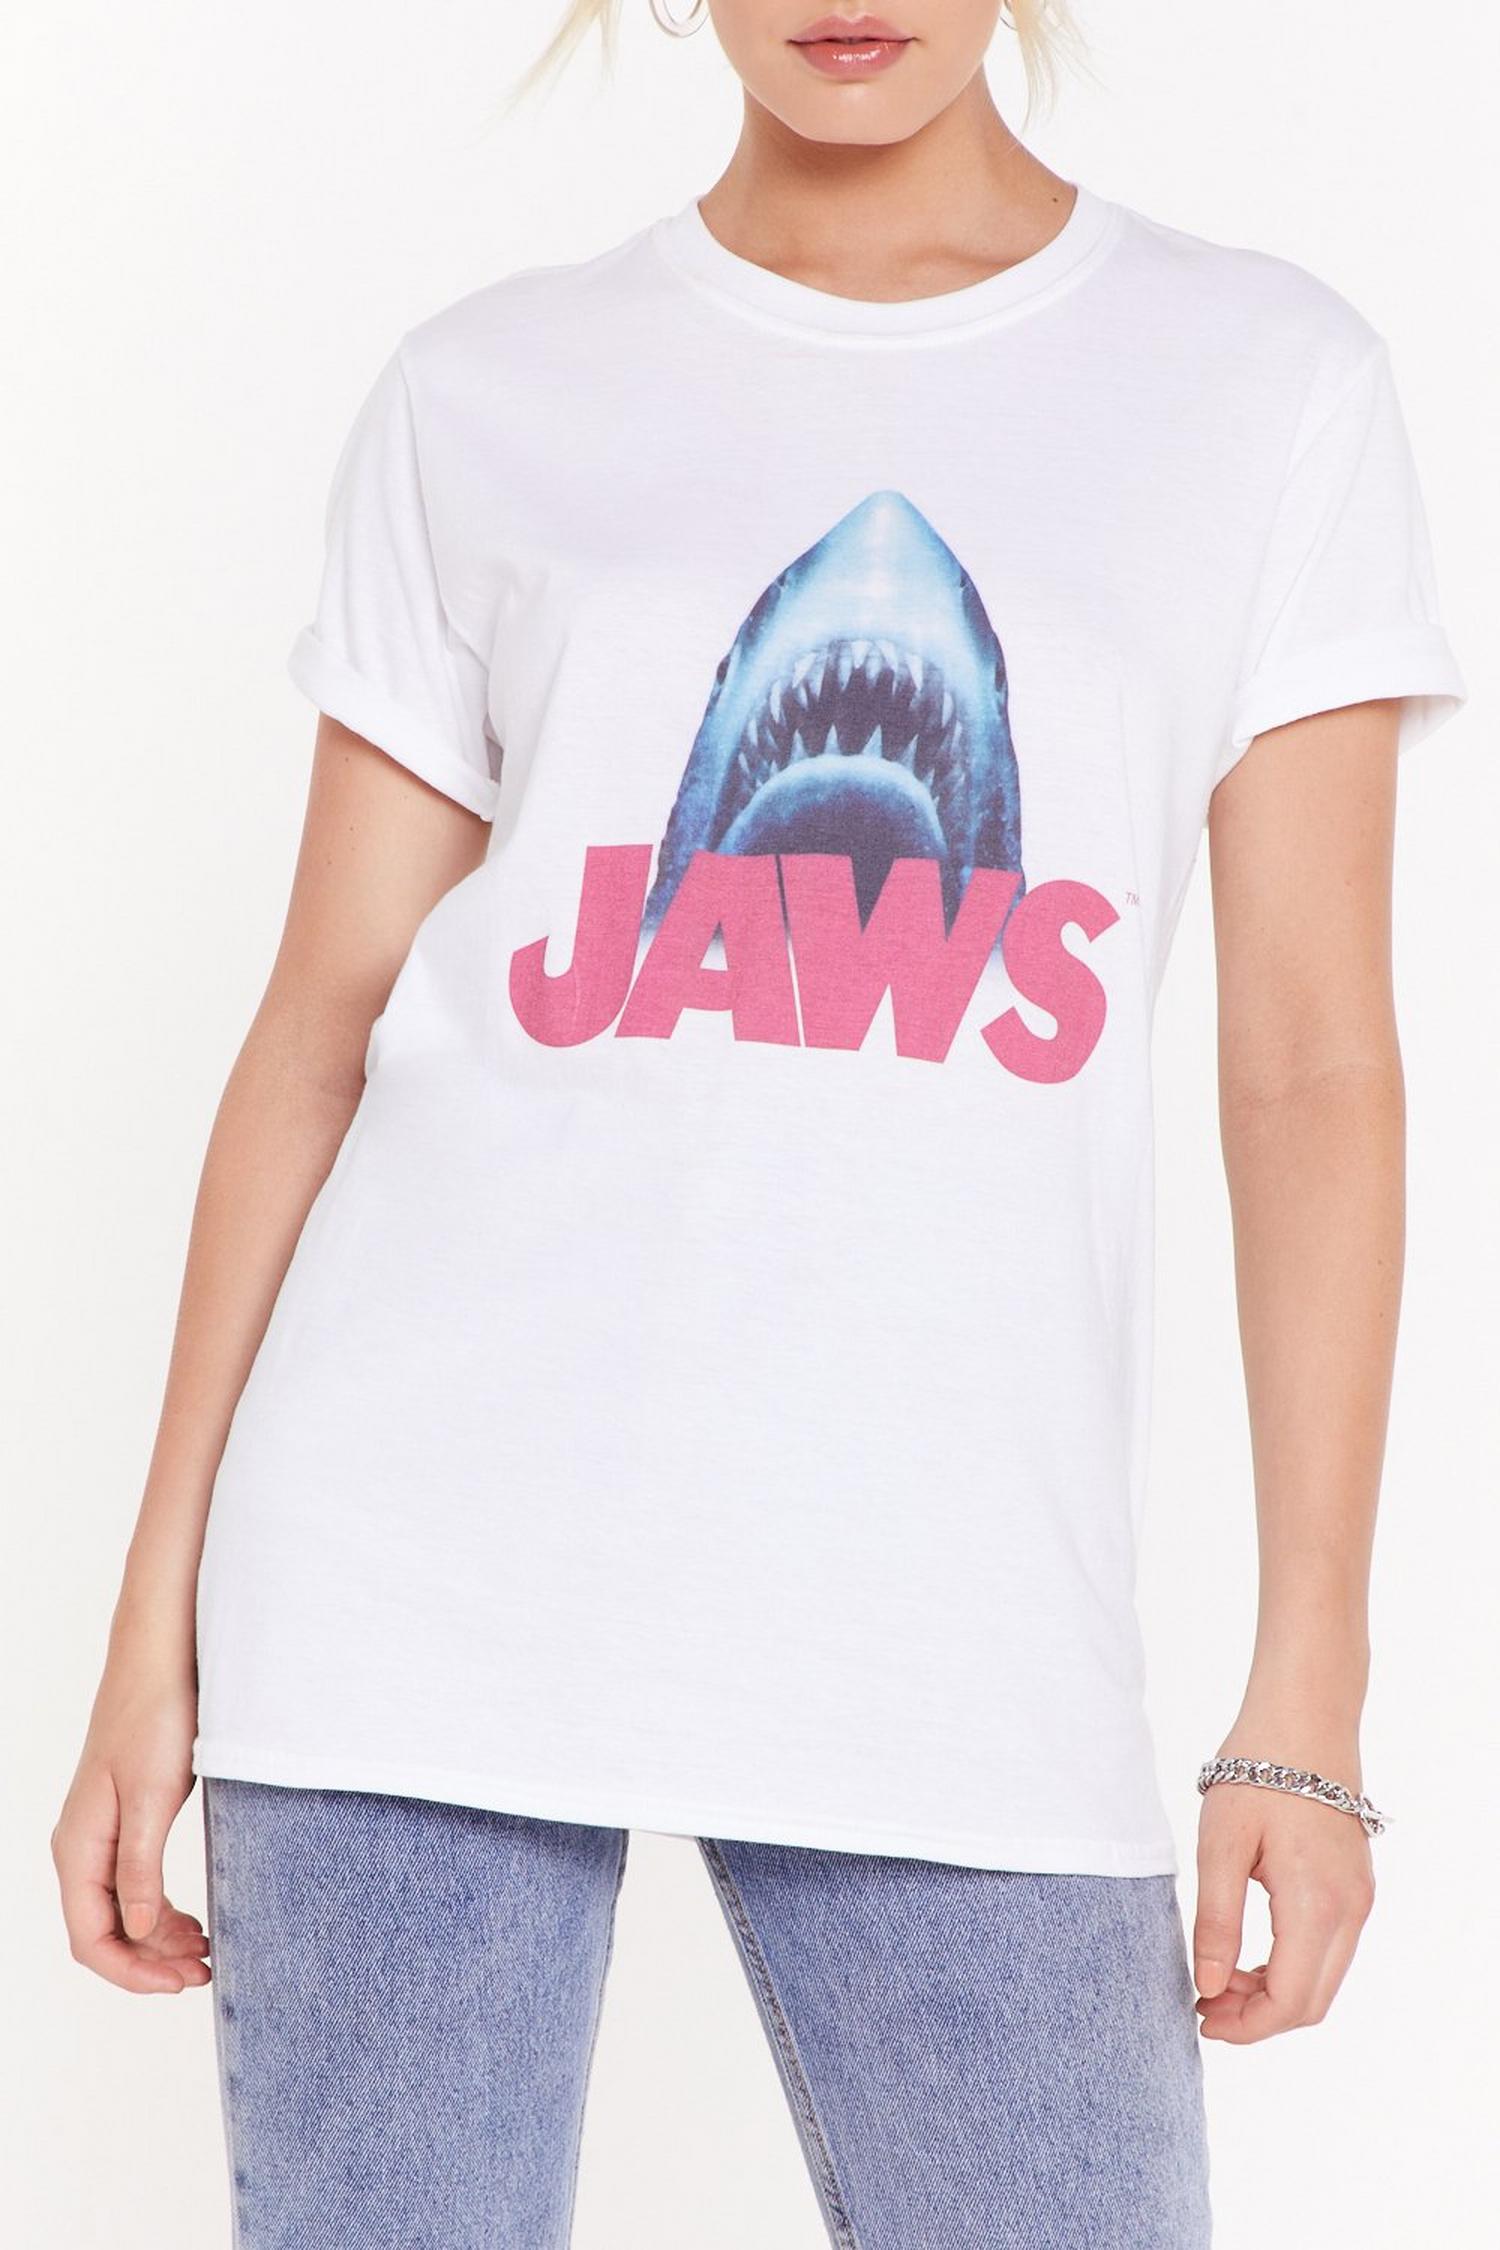 Here Comes Jaws Graphie Tee | Nasty Gal